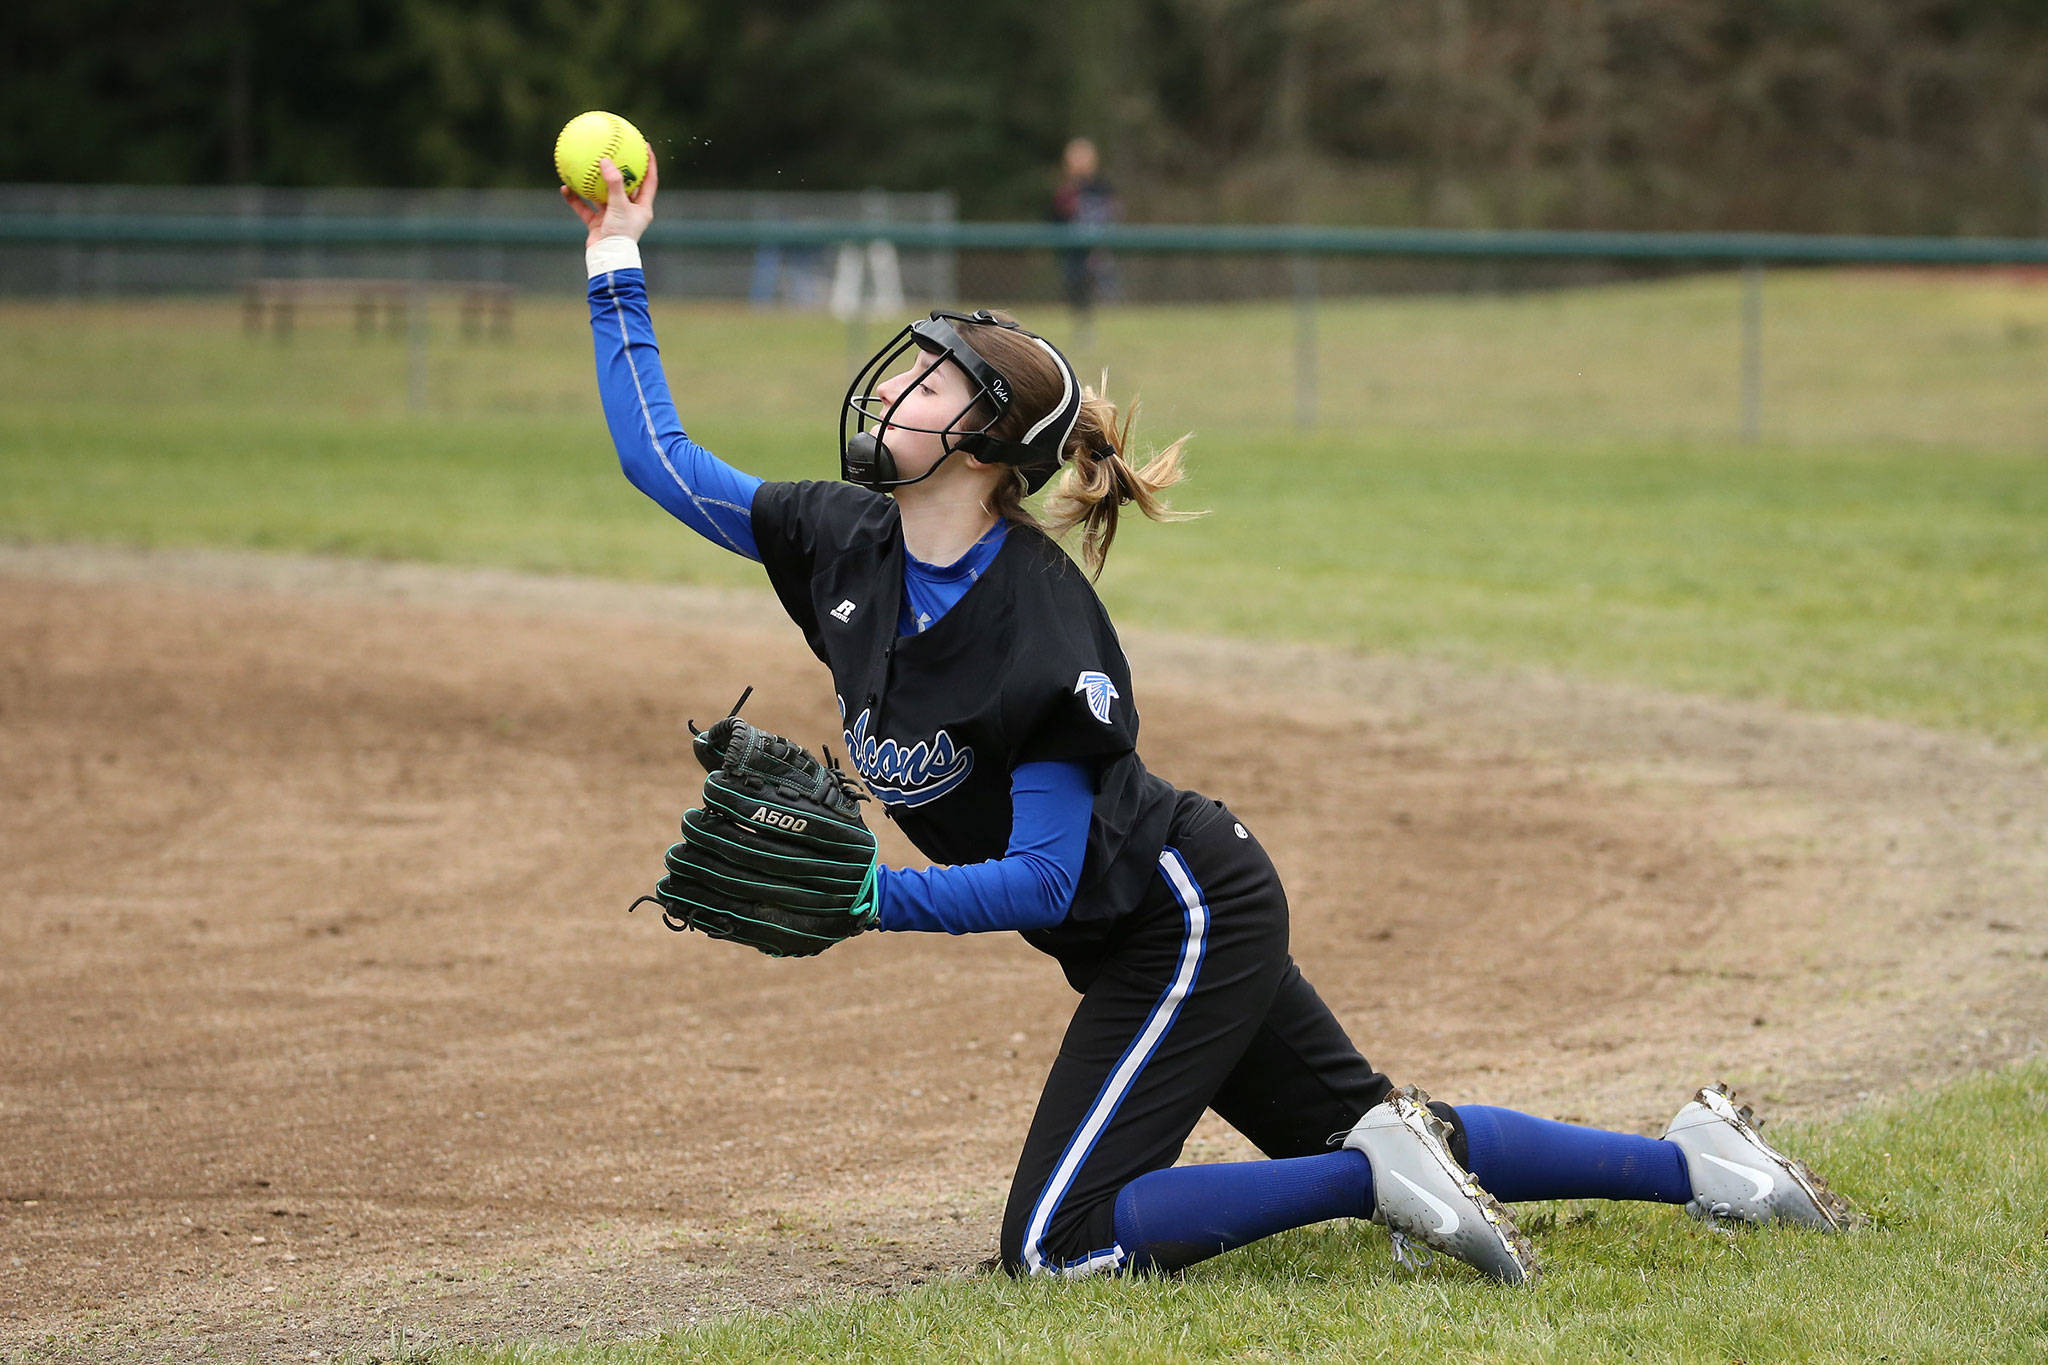 South Whidbey second baseman Myah Majestic throws to first from her knees after making a stop. (Photo by John Fisken)